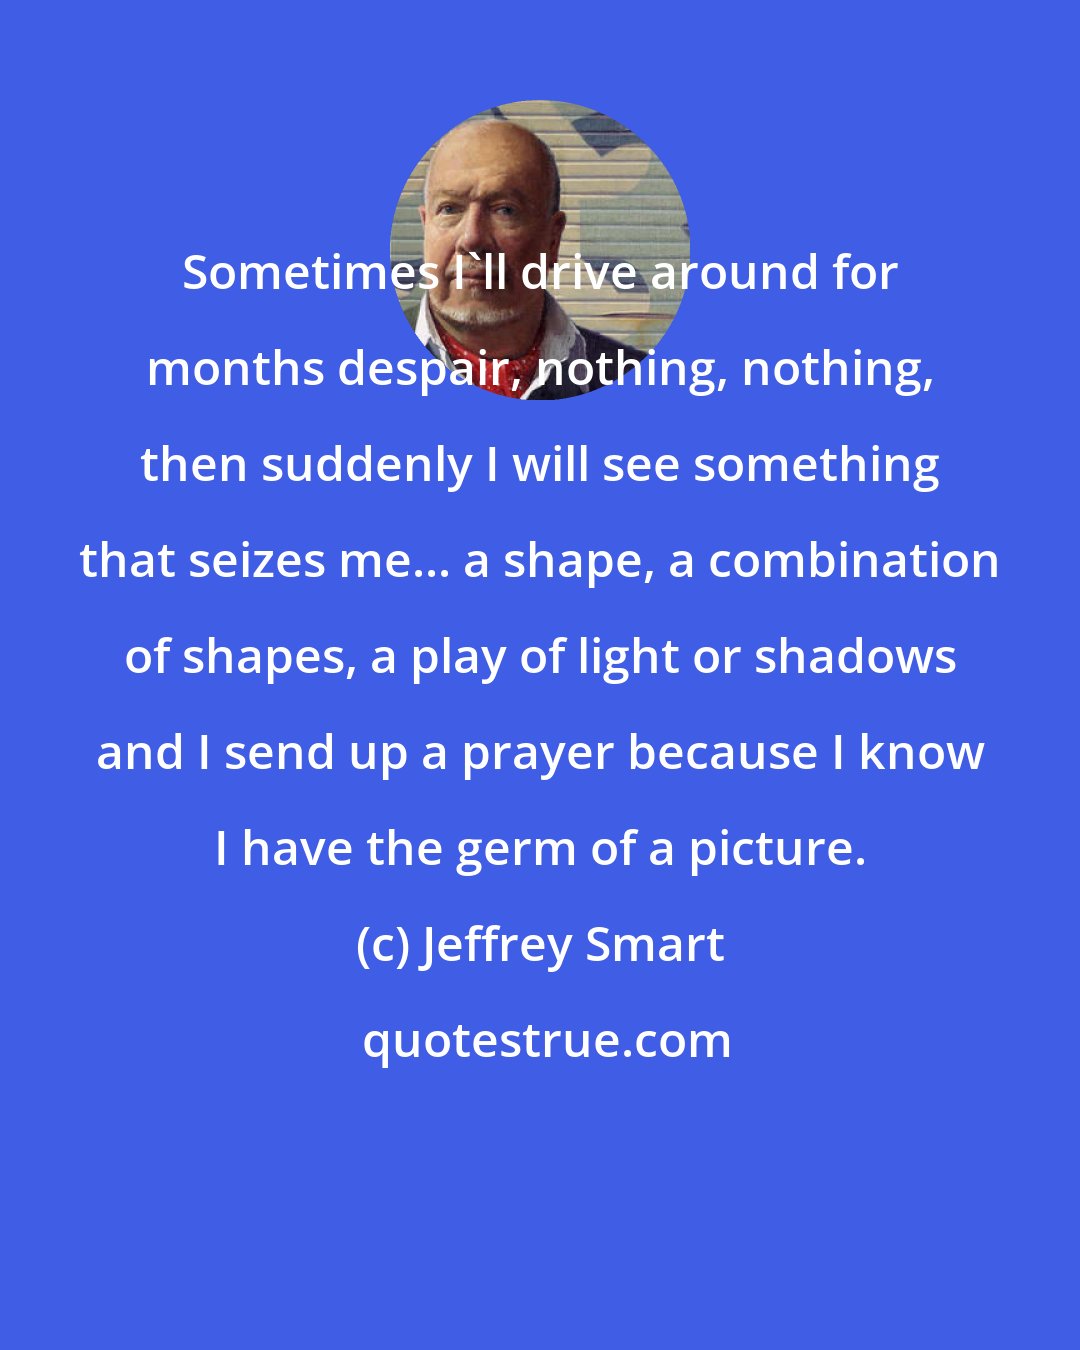 Jeffrey Smart: Sometimes I'll drive around for months despair, nothing, nothing, then suddenly I will see something that seizes me... a shape, a combination of shapes, a play of light or shadows and I send up a prayer because I know I have the germ of a picture.